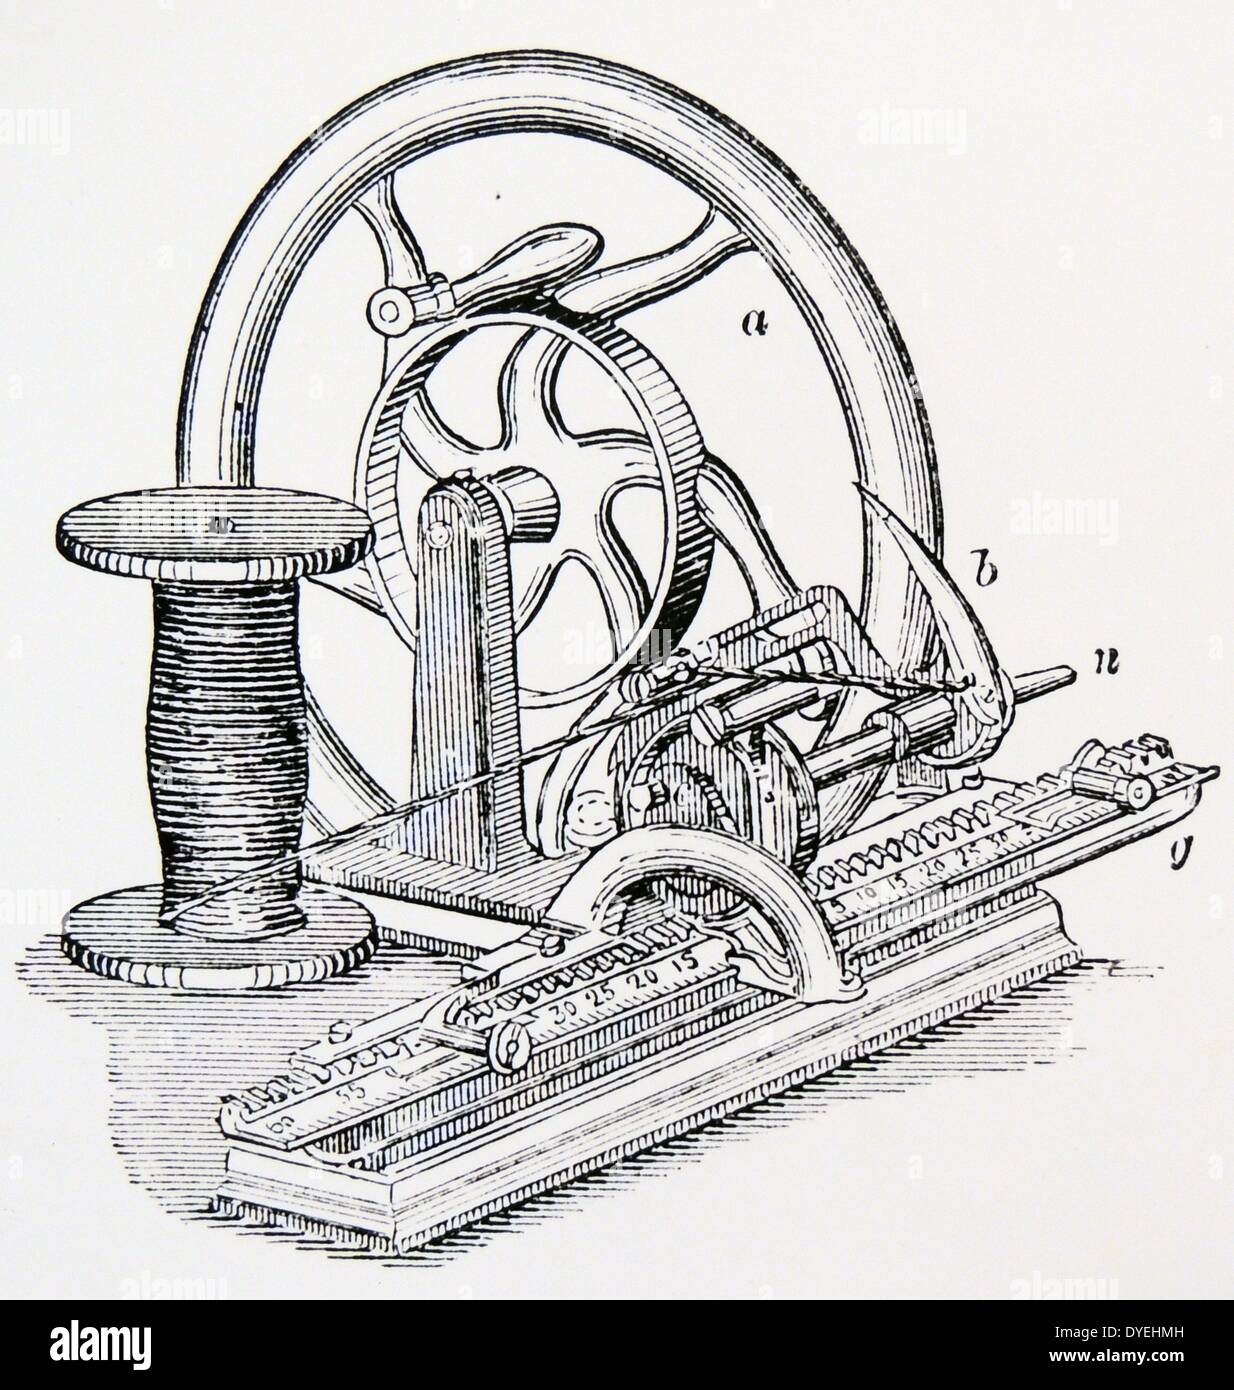 Hinckley's single-needle knitting machine. Loops were formed by a single needle and looper, and held on the teeth of a comb which was moved along one tooth at a time. Engraving, London, c1880. Stock Photo